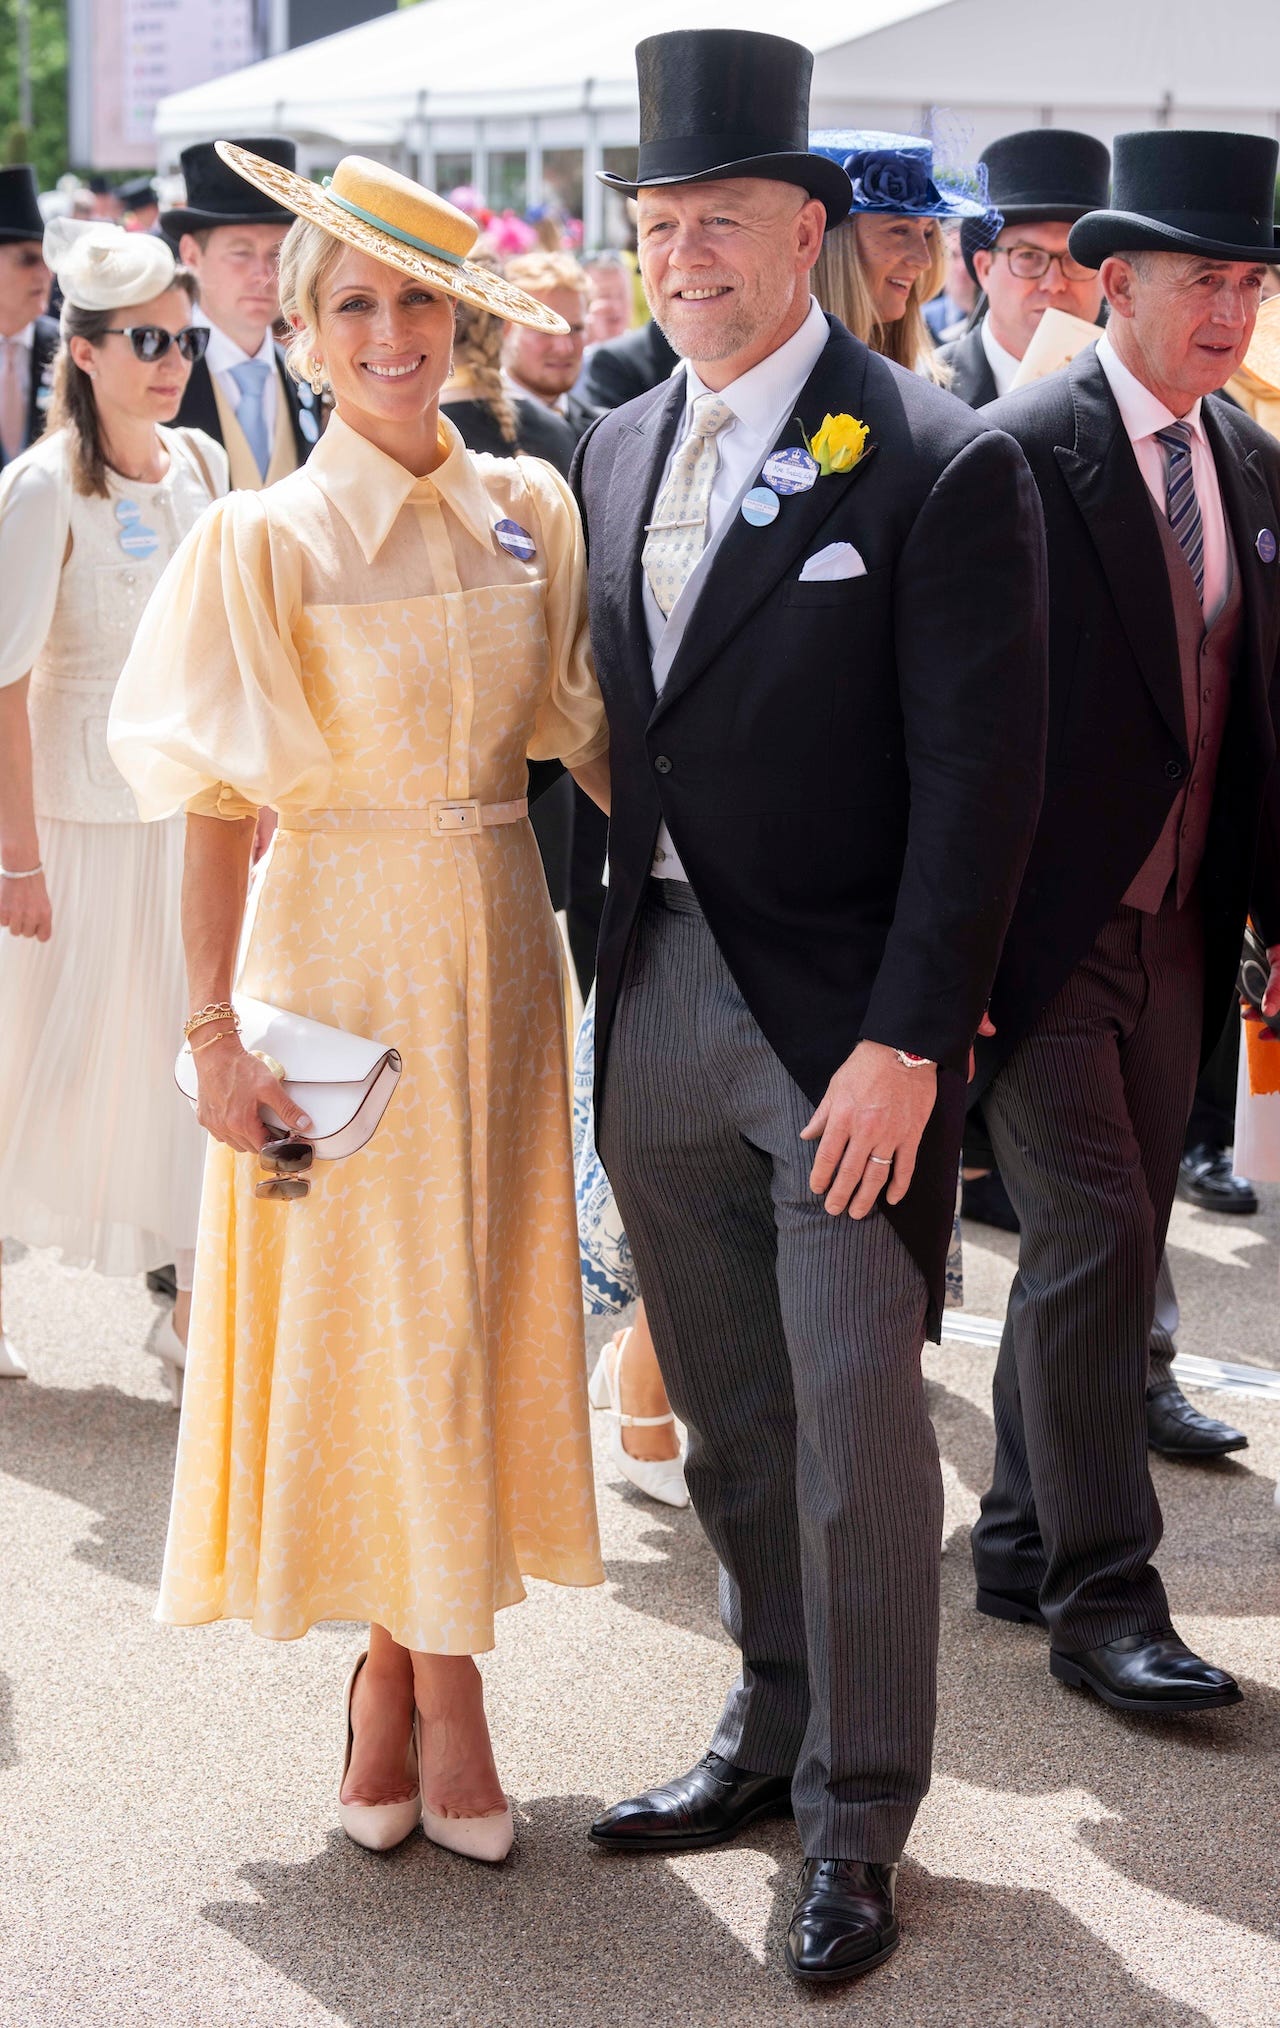 <p>The Tindalls took a note from Charles and Camilla's stylebook and opted for subtly coordinating looks on day one of Royal Ascot.</p><p>Zara, 43, arrived in a yellow dress designed by <a href="https://lauragreen.com/product/masai/">Laura Green</a>. The "Masai" dress features sheer silk sleeves and a dramatic collar and retails for £1,900, or around $2,400.</p><p>Mike, 45, wore a morning suit and accessorized his jacket lapel with a canary yellow rose, a nod toward his wife's look.</p>